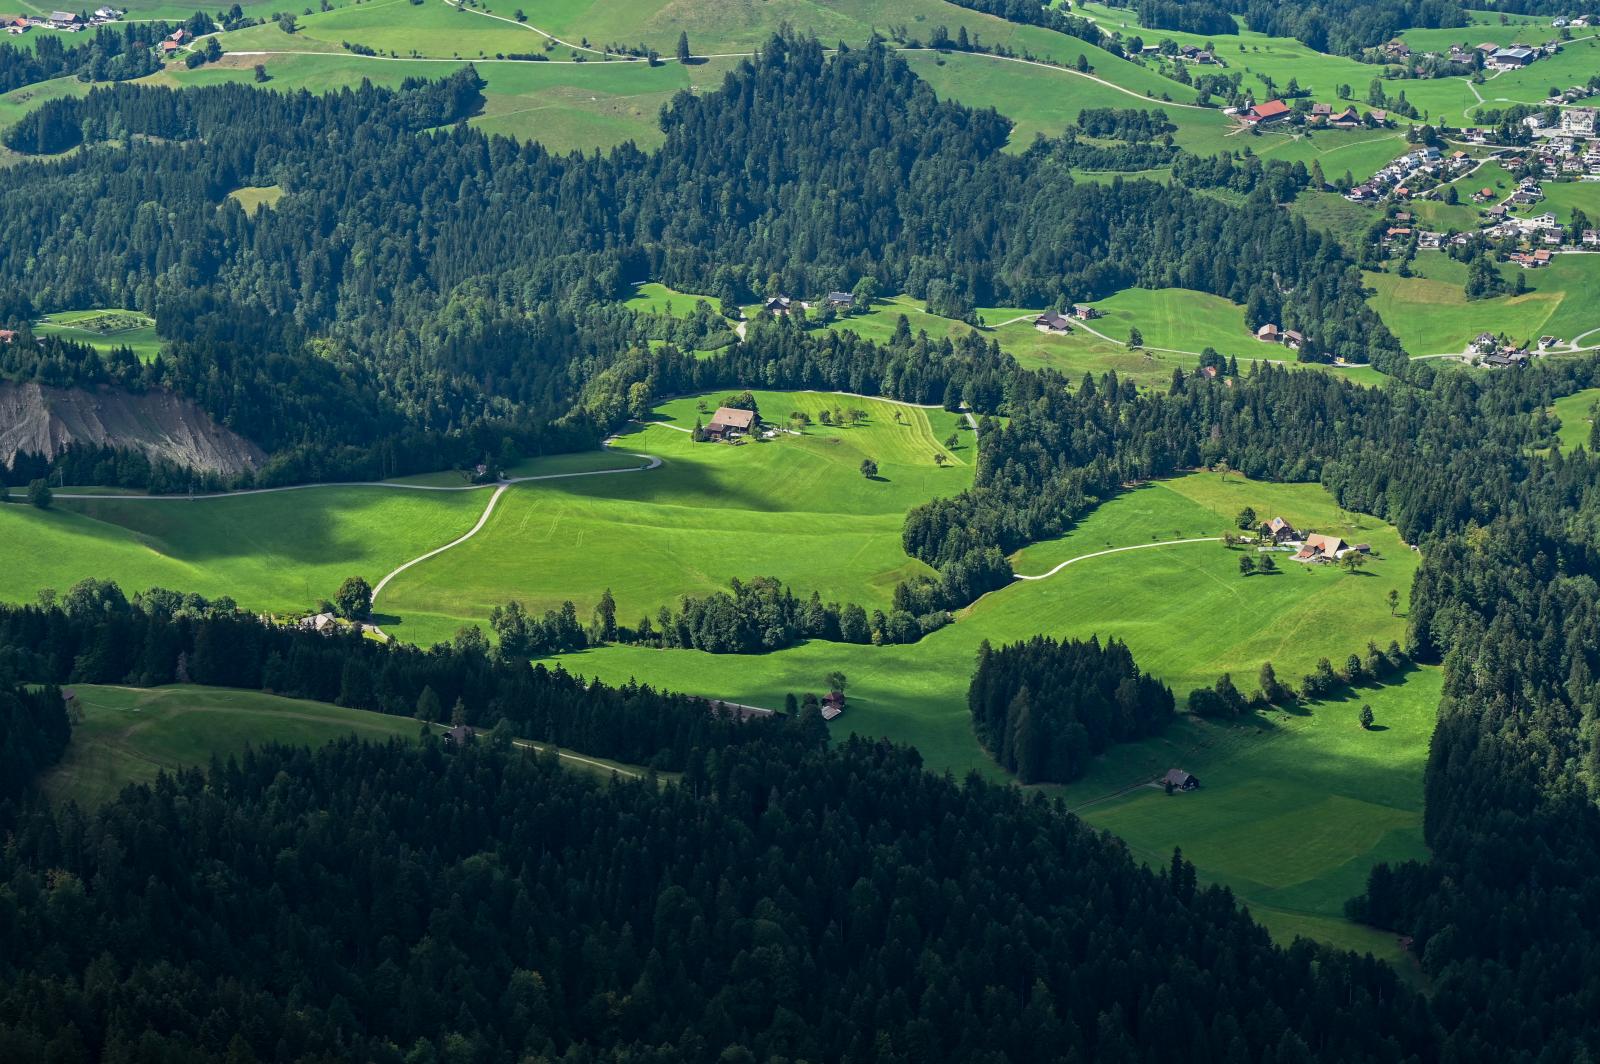 Swiss landscape | Buy this image